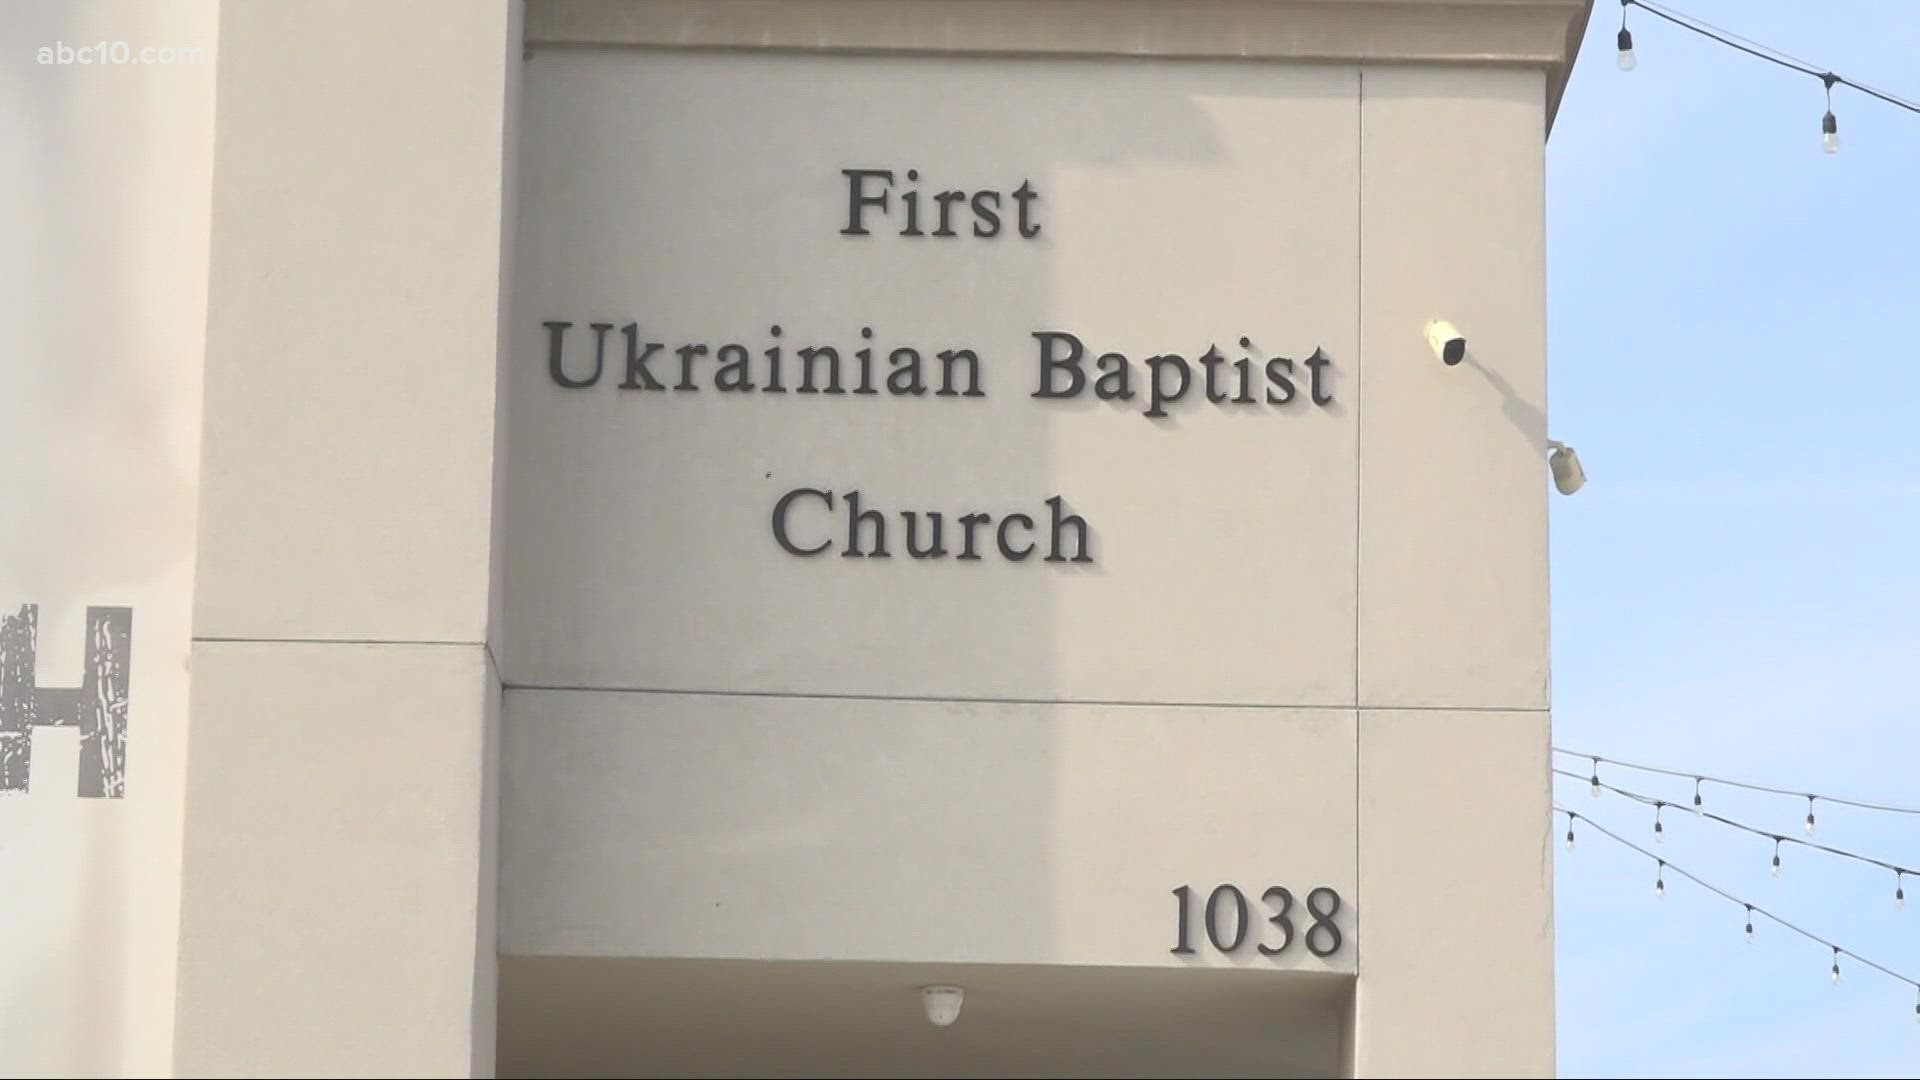 Sacramento is home to one of the largest Slavic populations in the country. There are an estimated 100 Russian and Ukrainian churches here in Sacramento.